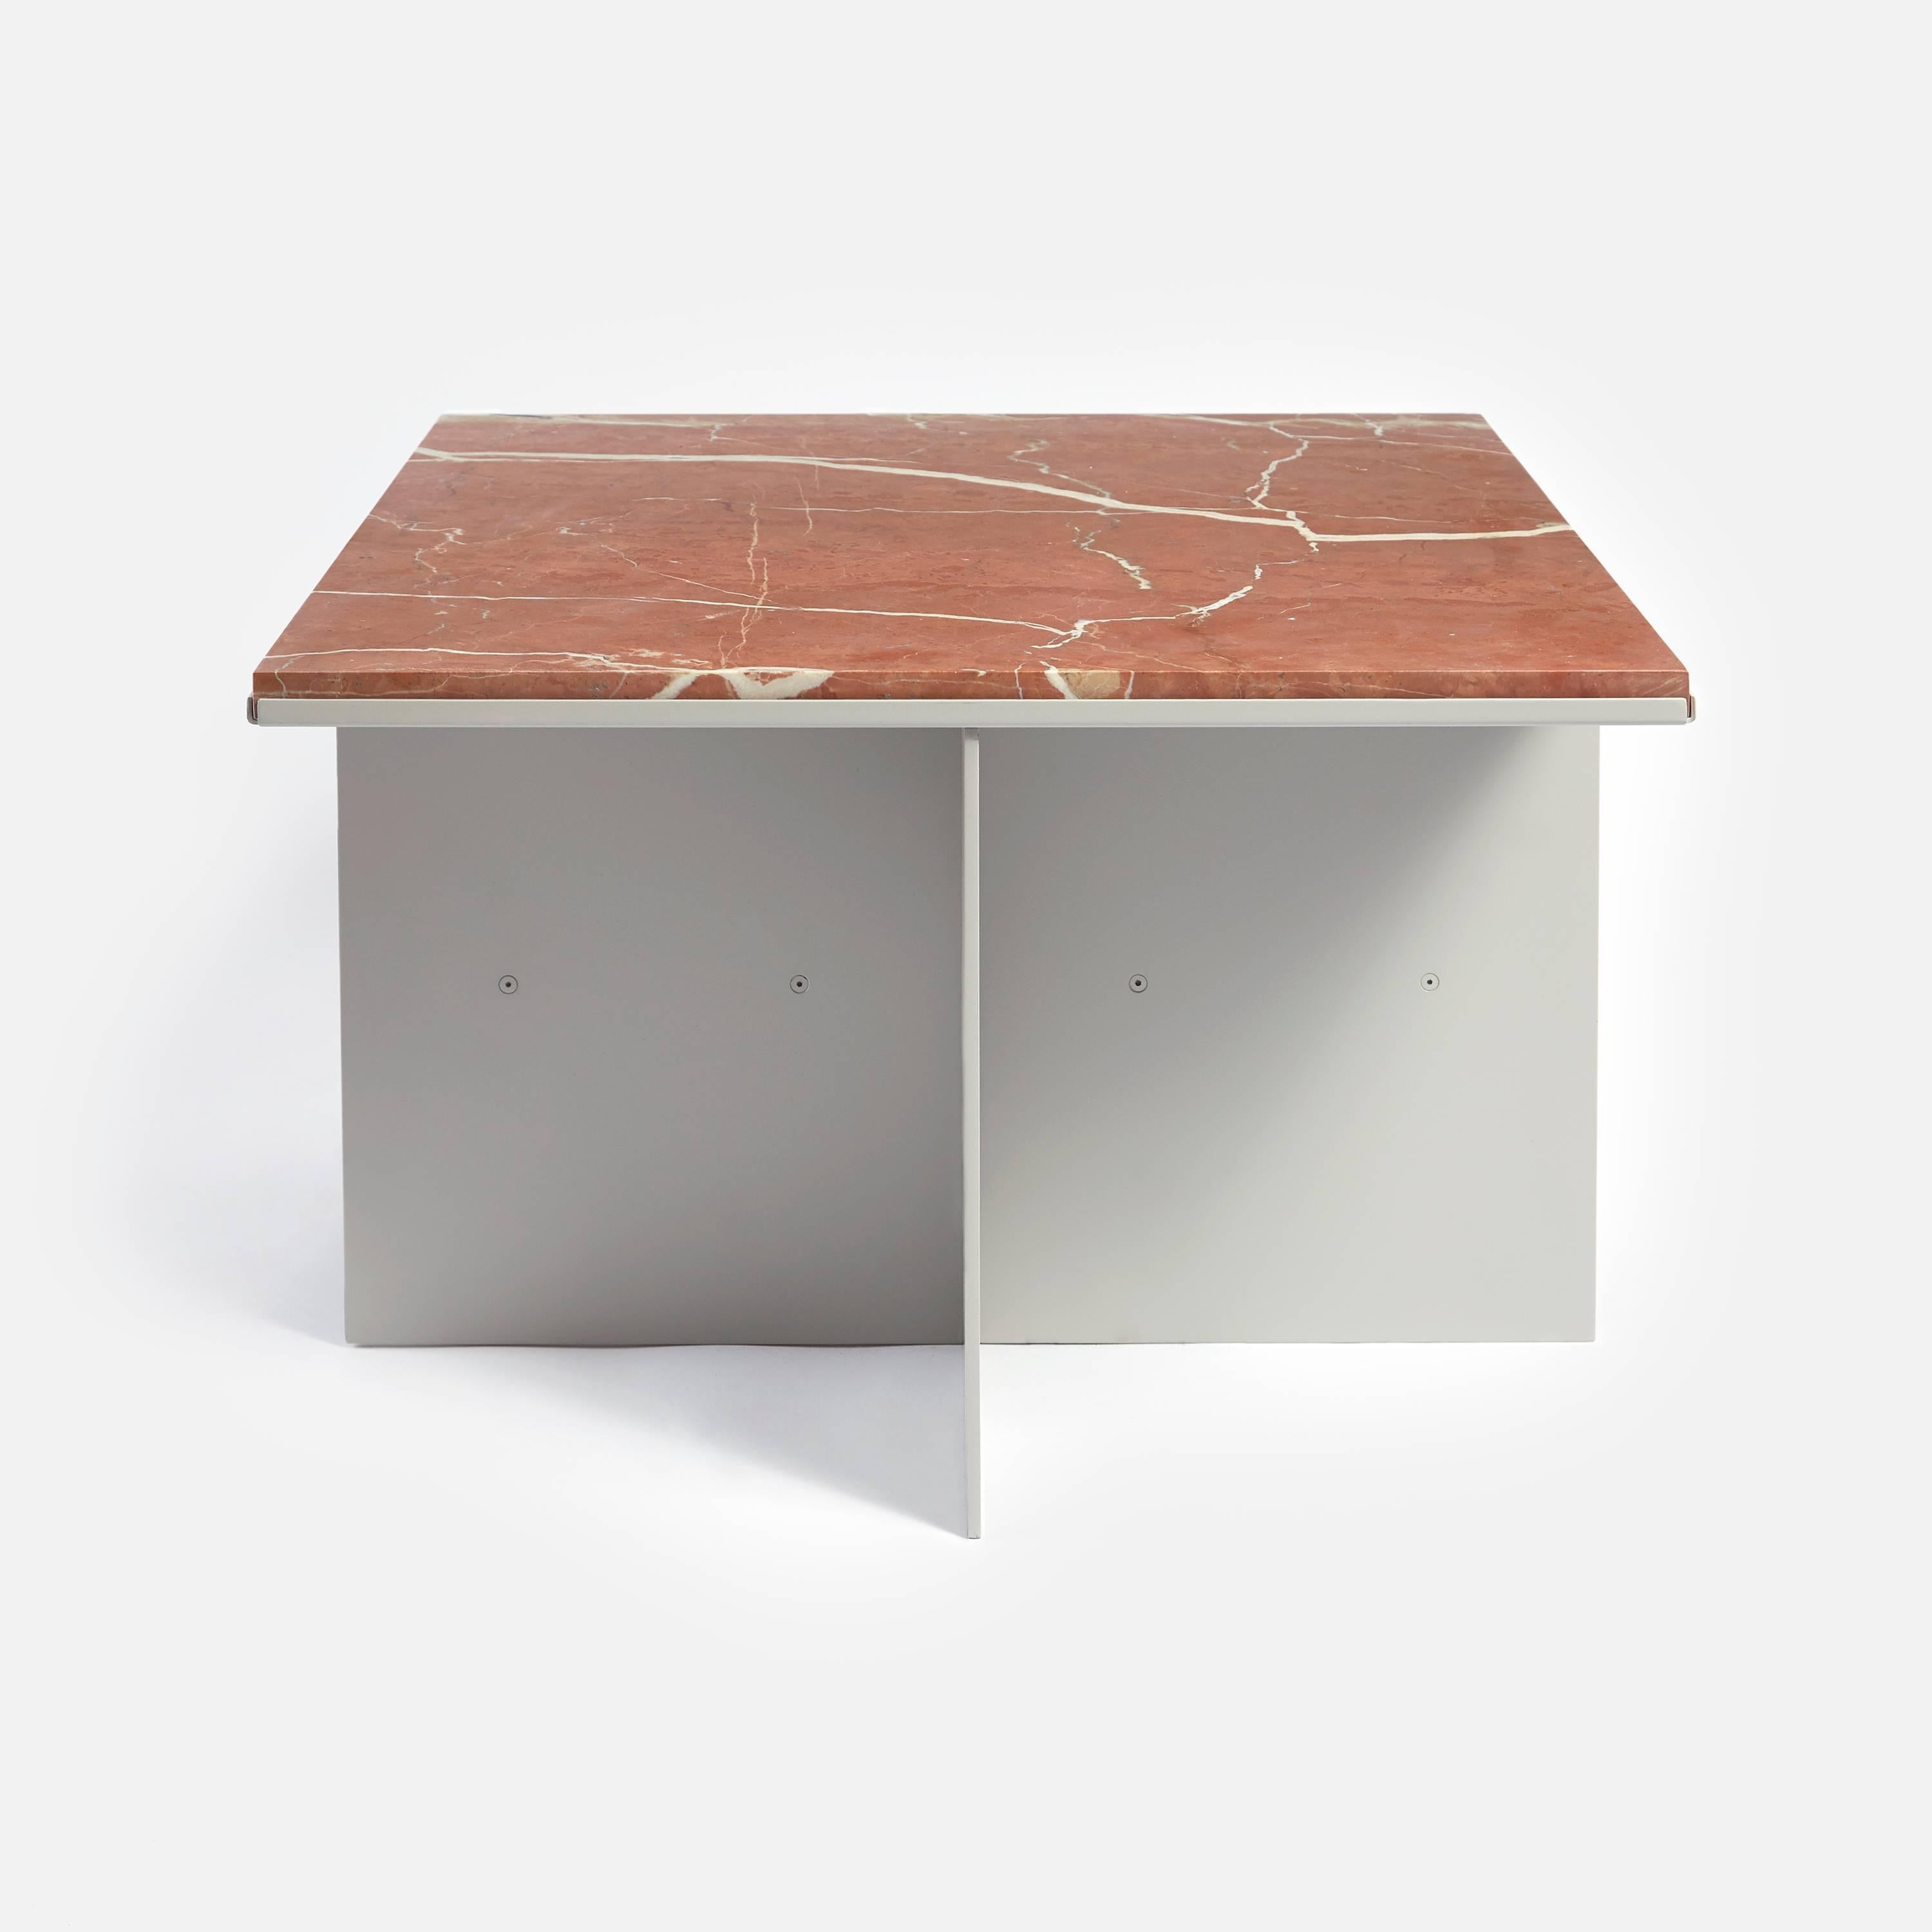 Other kingdom's uniform tables complement the natural warmth of a marble top with a precisely formed metal base that is fabricated in powder coated aluminium.

The marble top is available in solid marble or with an inlaid grid pattern similar to our